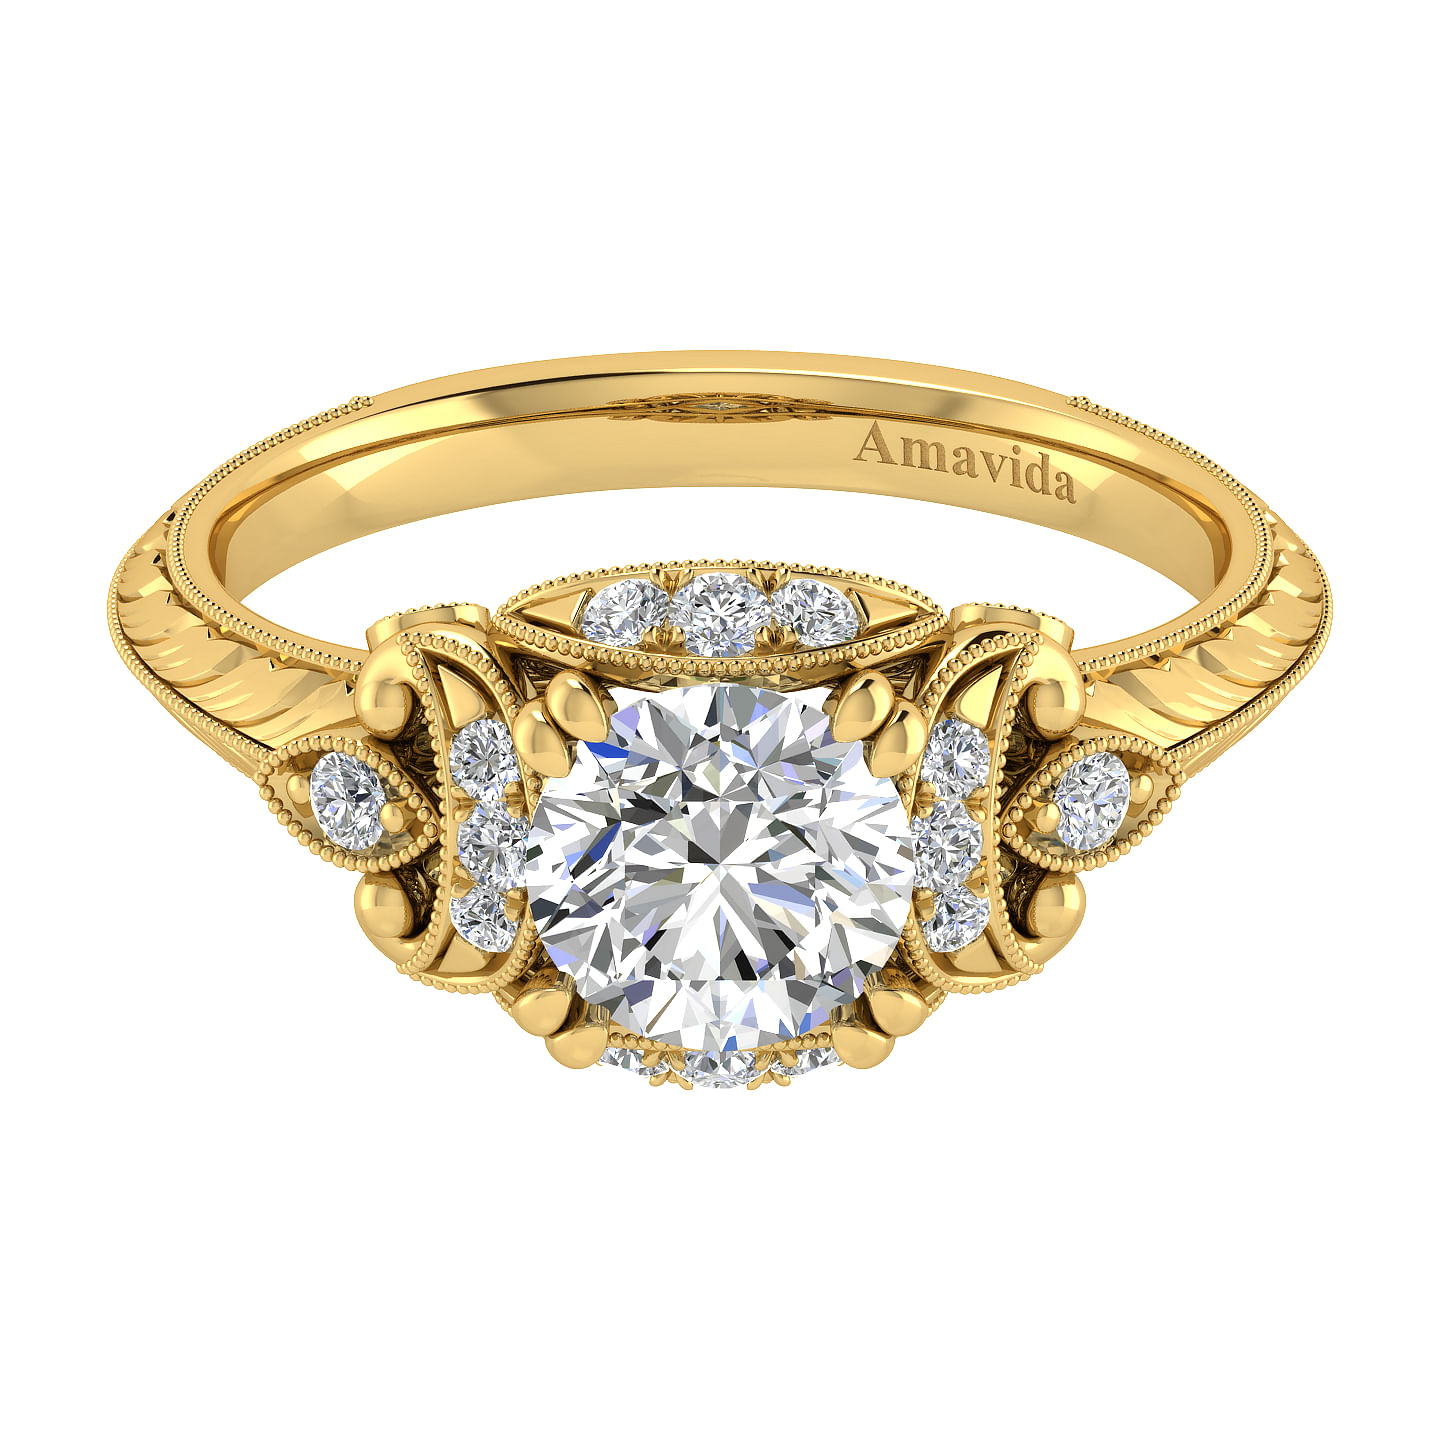 Unique 18K Yellow Gold Vintage Inspired Diamond Halo Engagement Ring